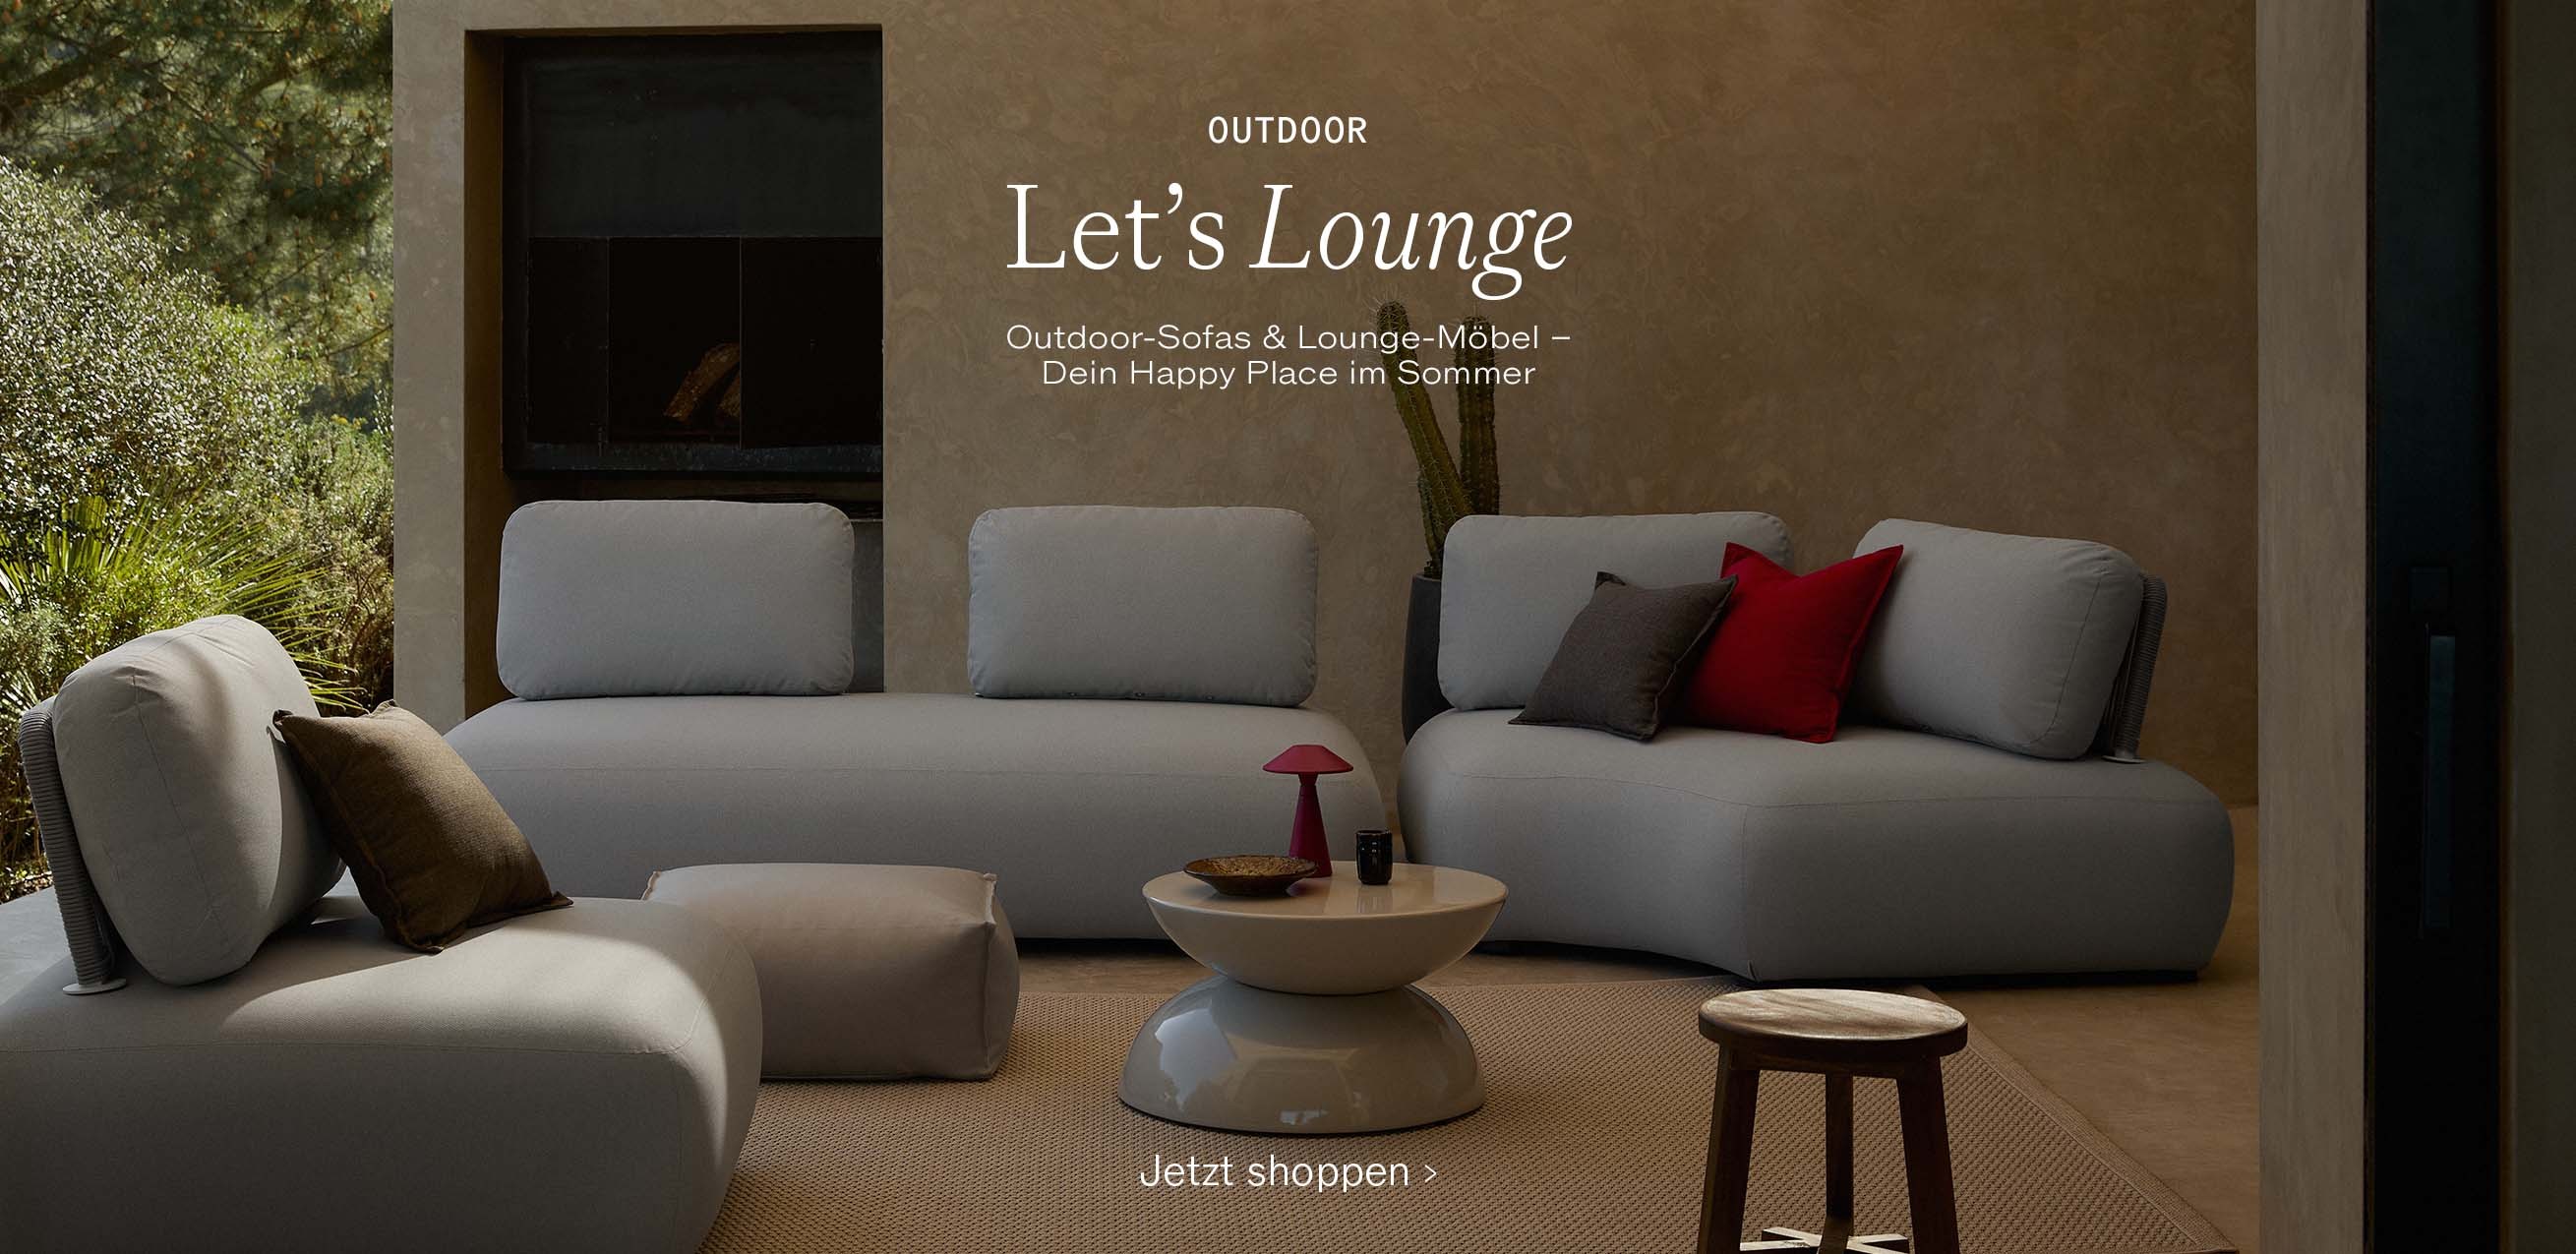 Outdoor Let’s Lounge! Outdoor-Sofas & Lounge-Möbel – Dein Happy Place im Sommer 